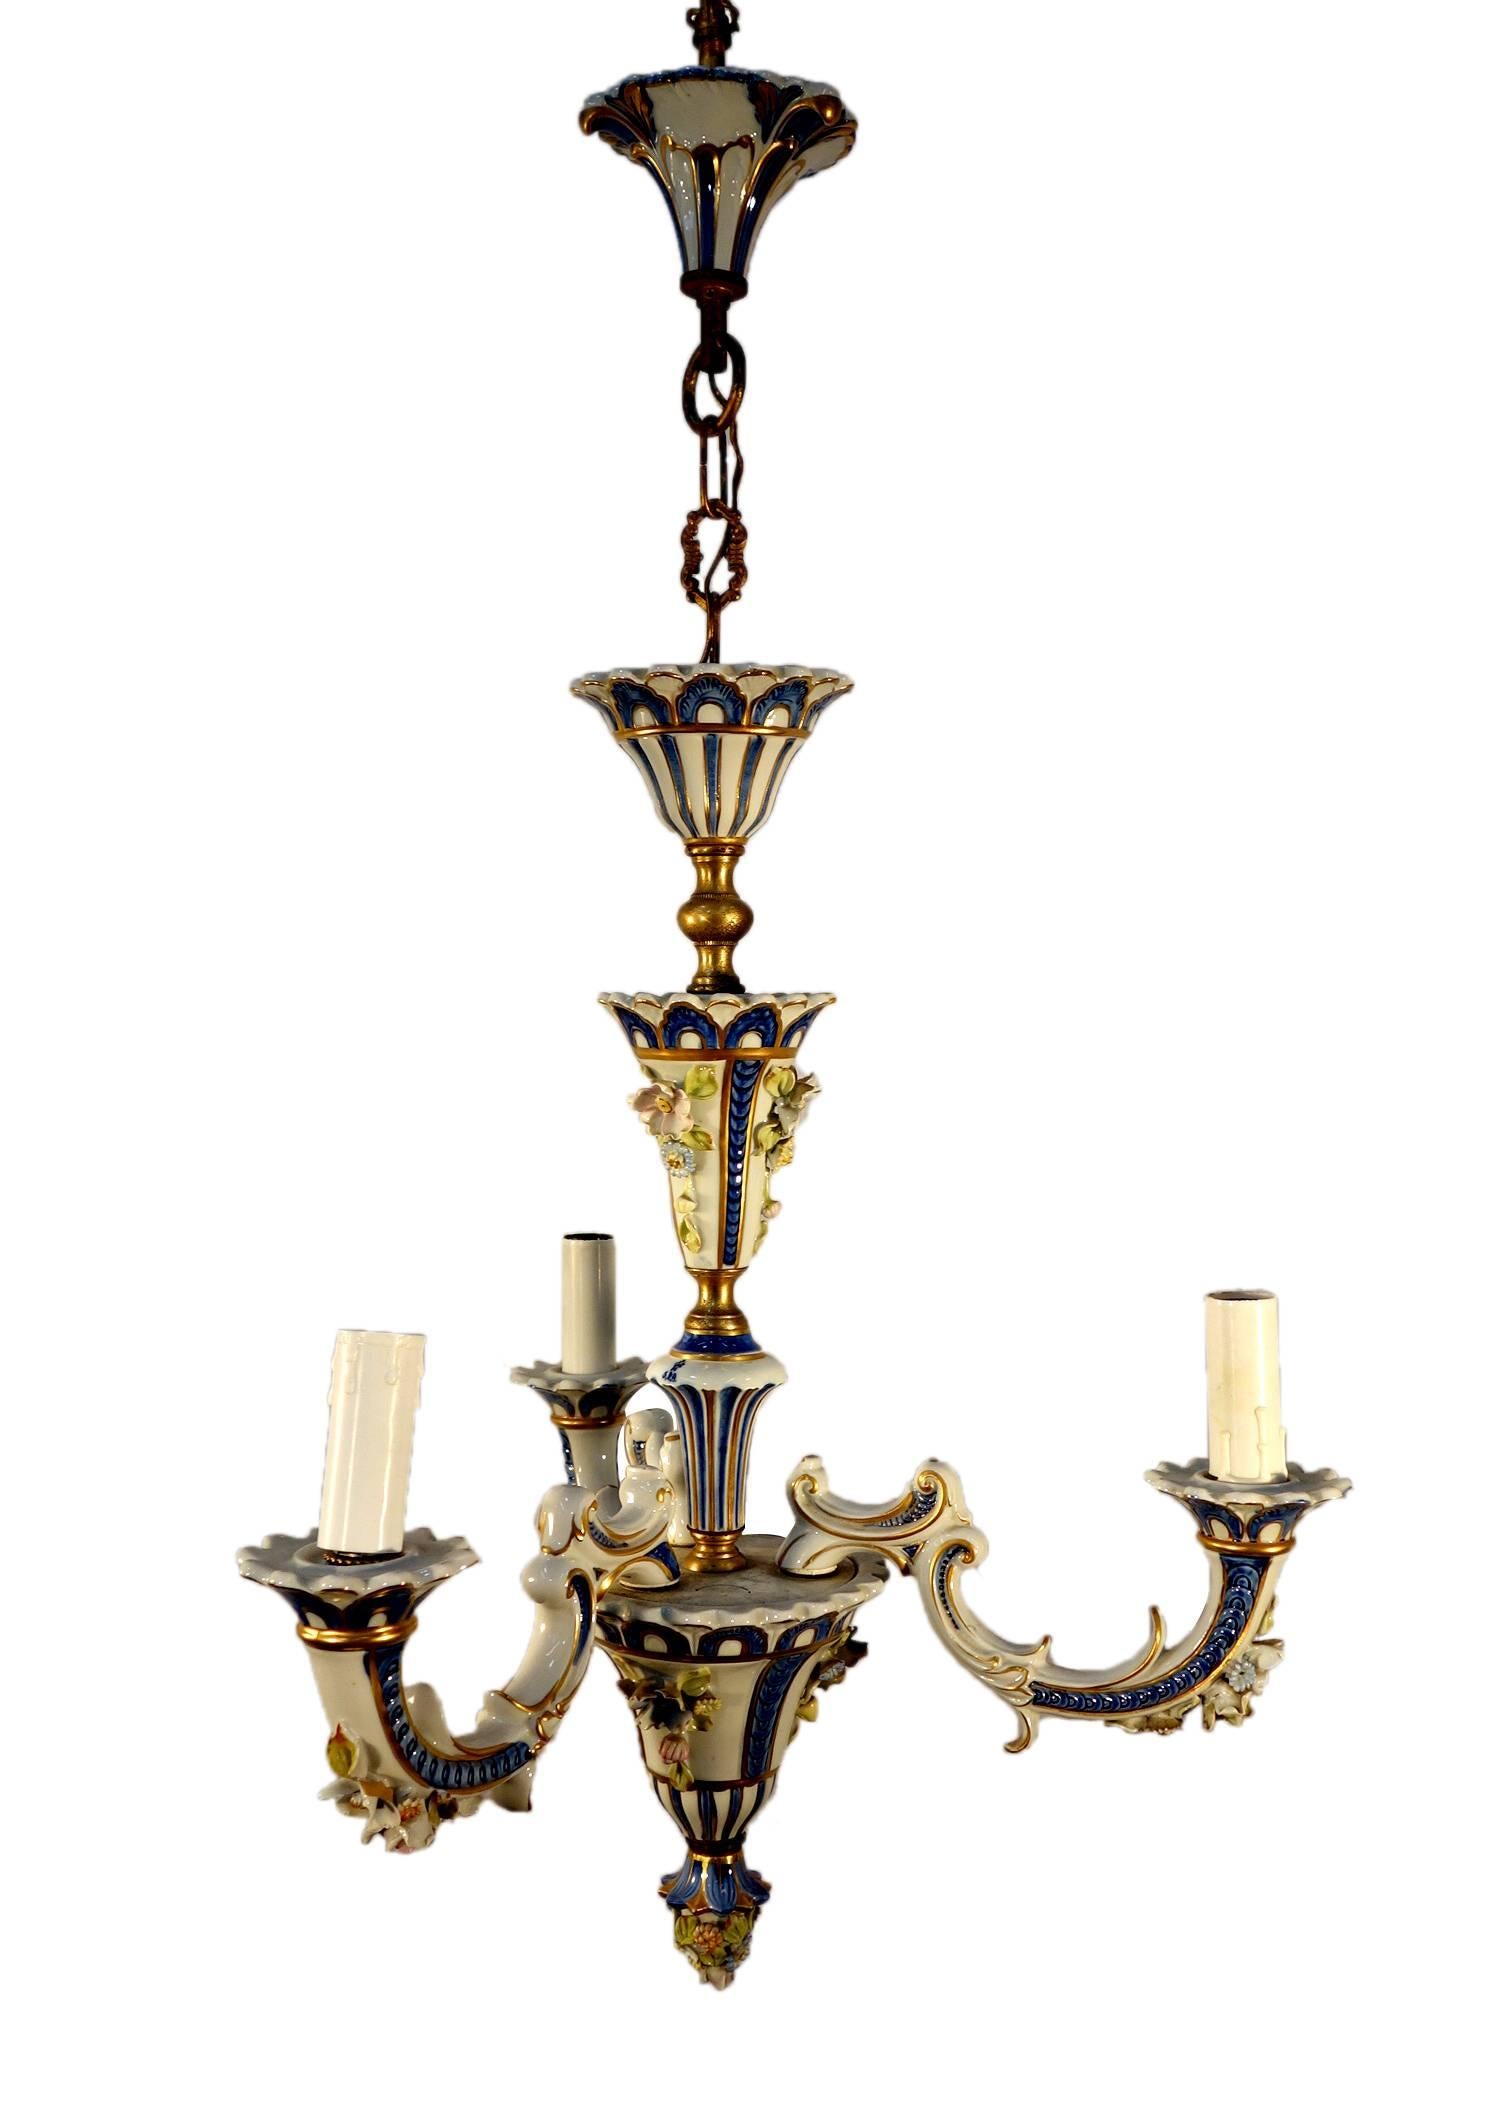 Darling little porcelain chandelier from Capodimonte. Beautiful and delicate elegance, white and blue with gold details and colorful little flowers.

Come with a matching little two light sconce. 

Measures: 32